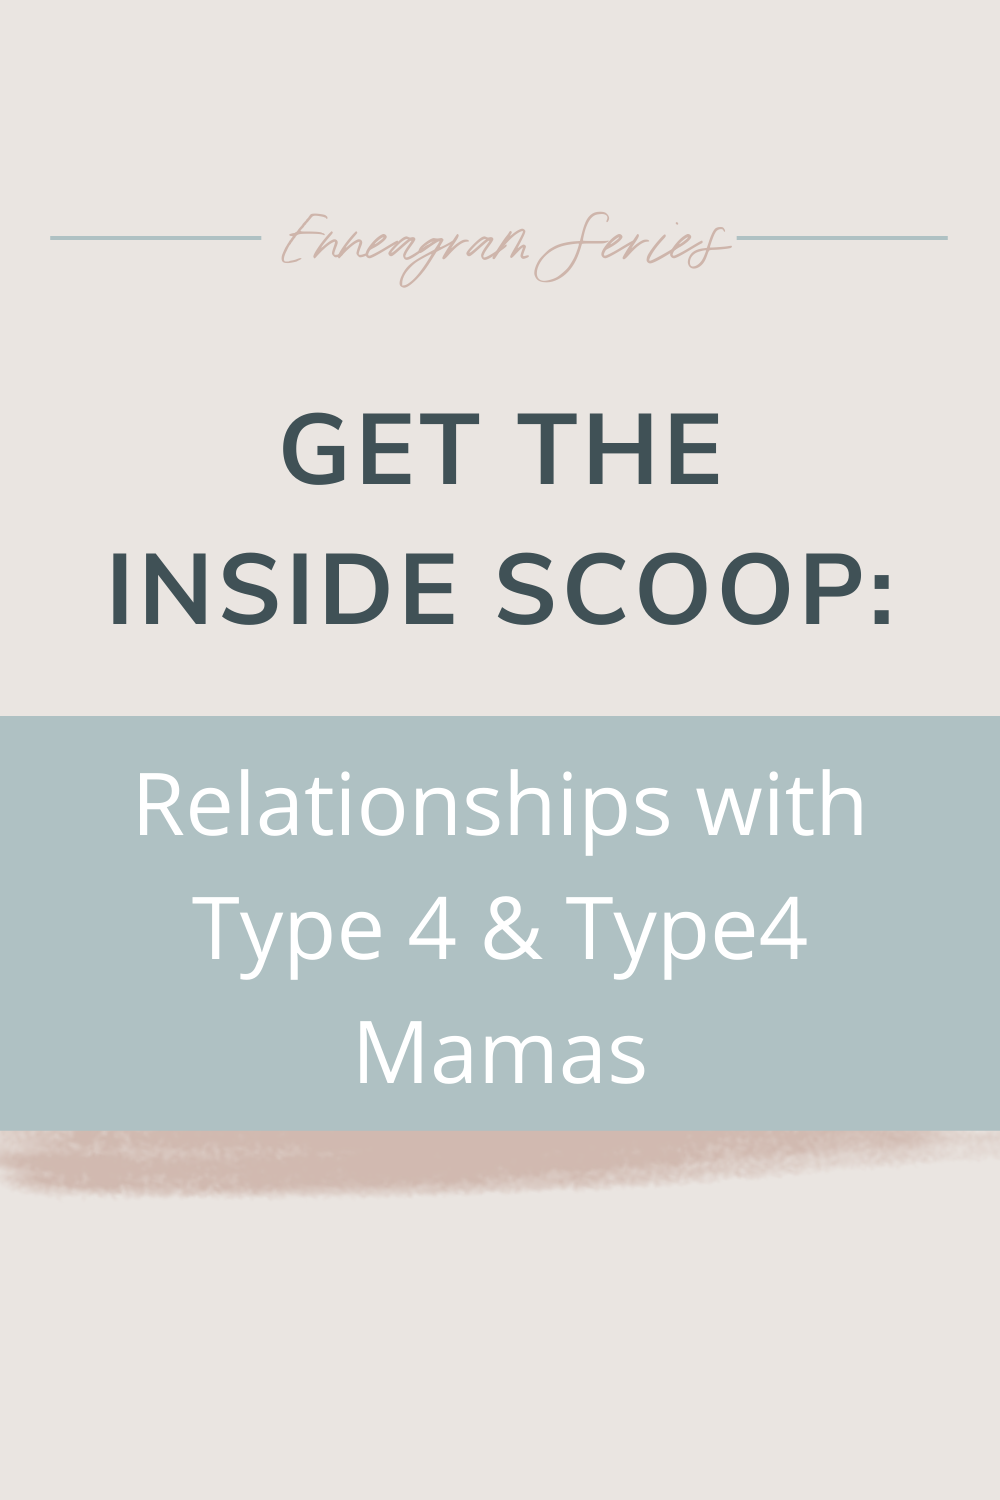 Get the Inside Scoop: Relationships with Type Four and Type Four Mamas | Curious how the Enneagram Type Four shapes up in the love and parenting departments? This blog shares quotes from Type Fours and those in partnership with them so we can better learn about their experiences. Check out this post to enhance your compassion and attunement to our dear friends, Type Four! Cheers!